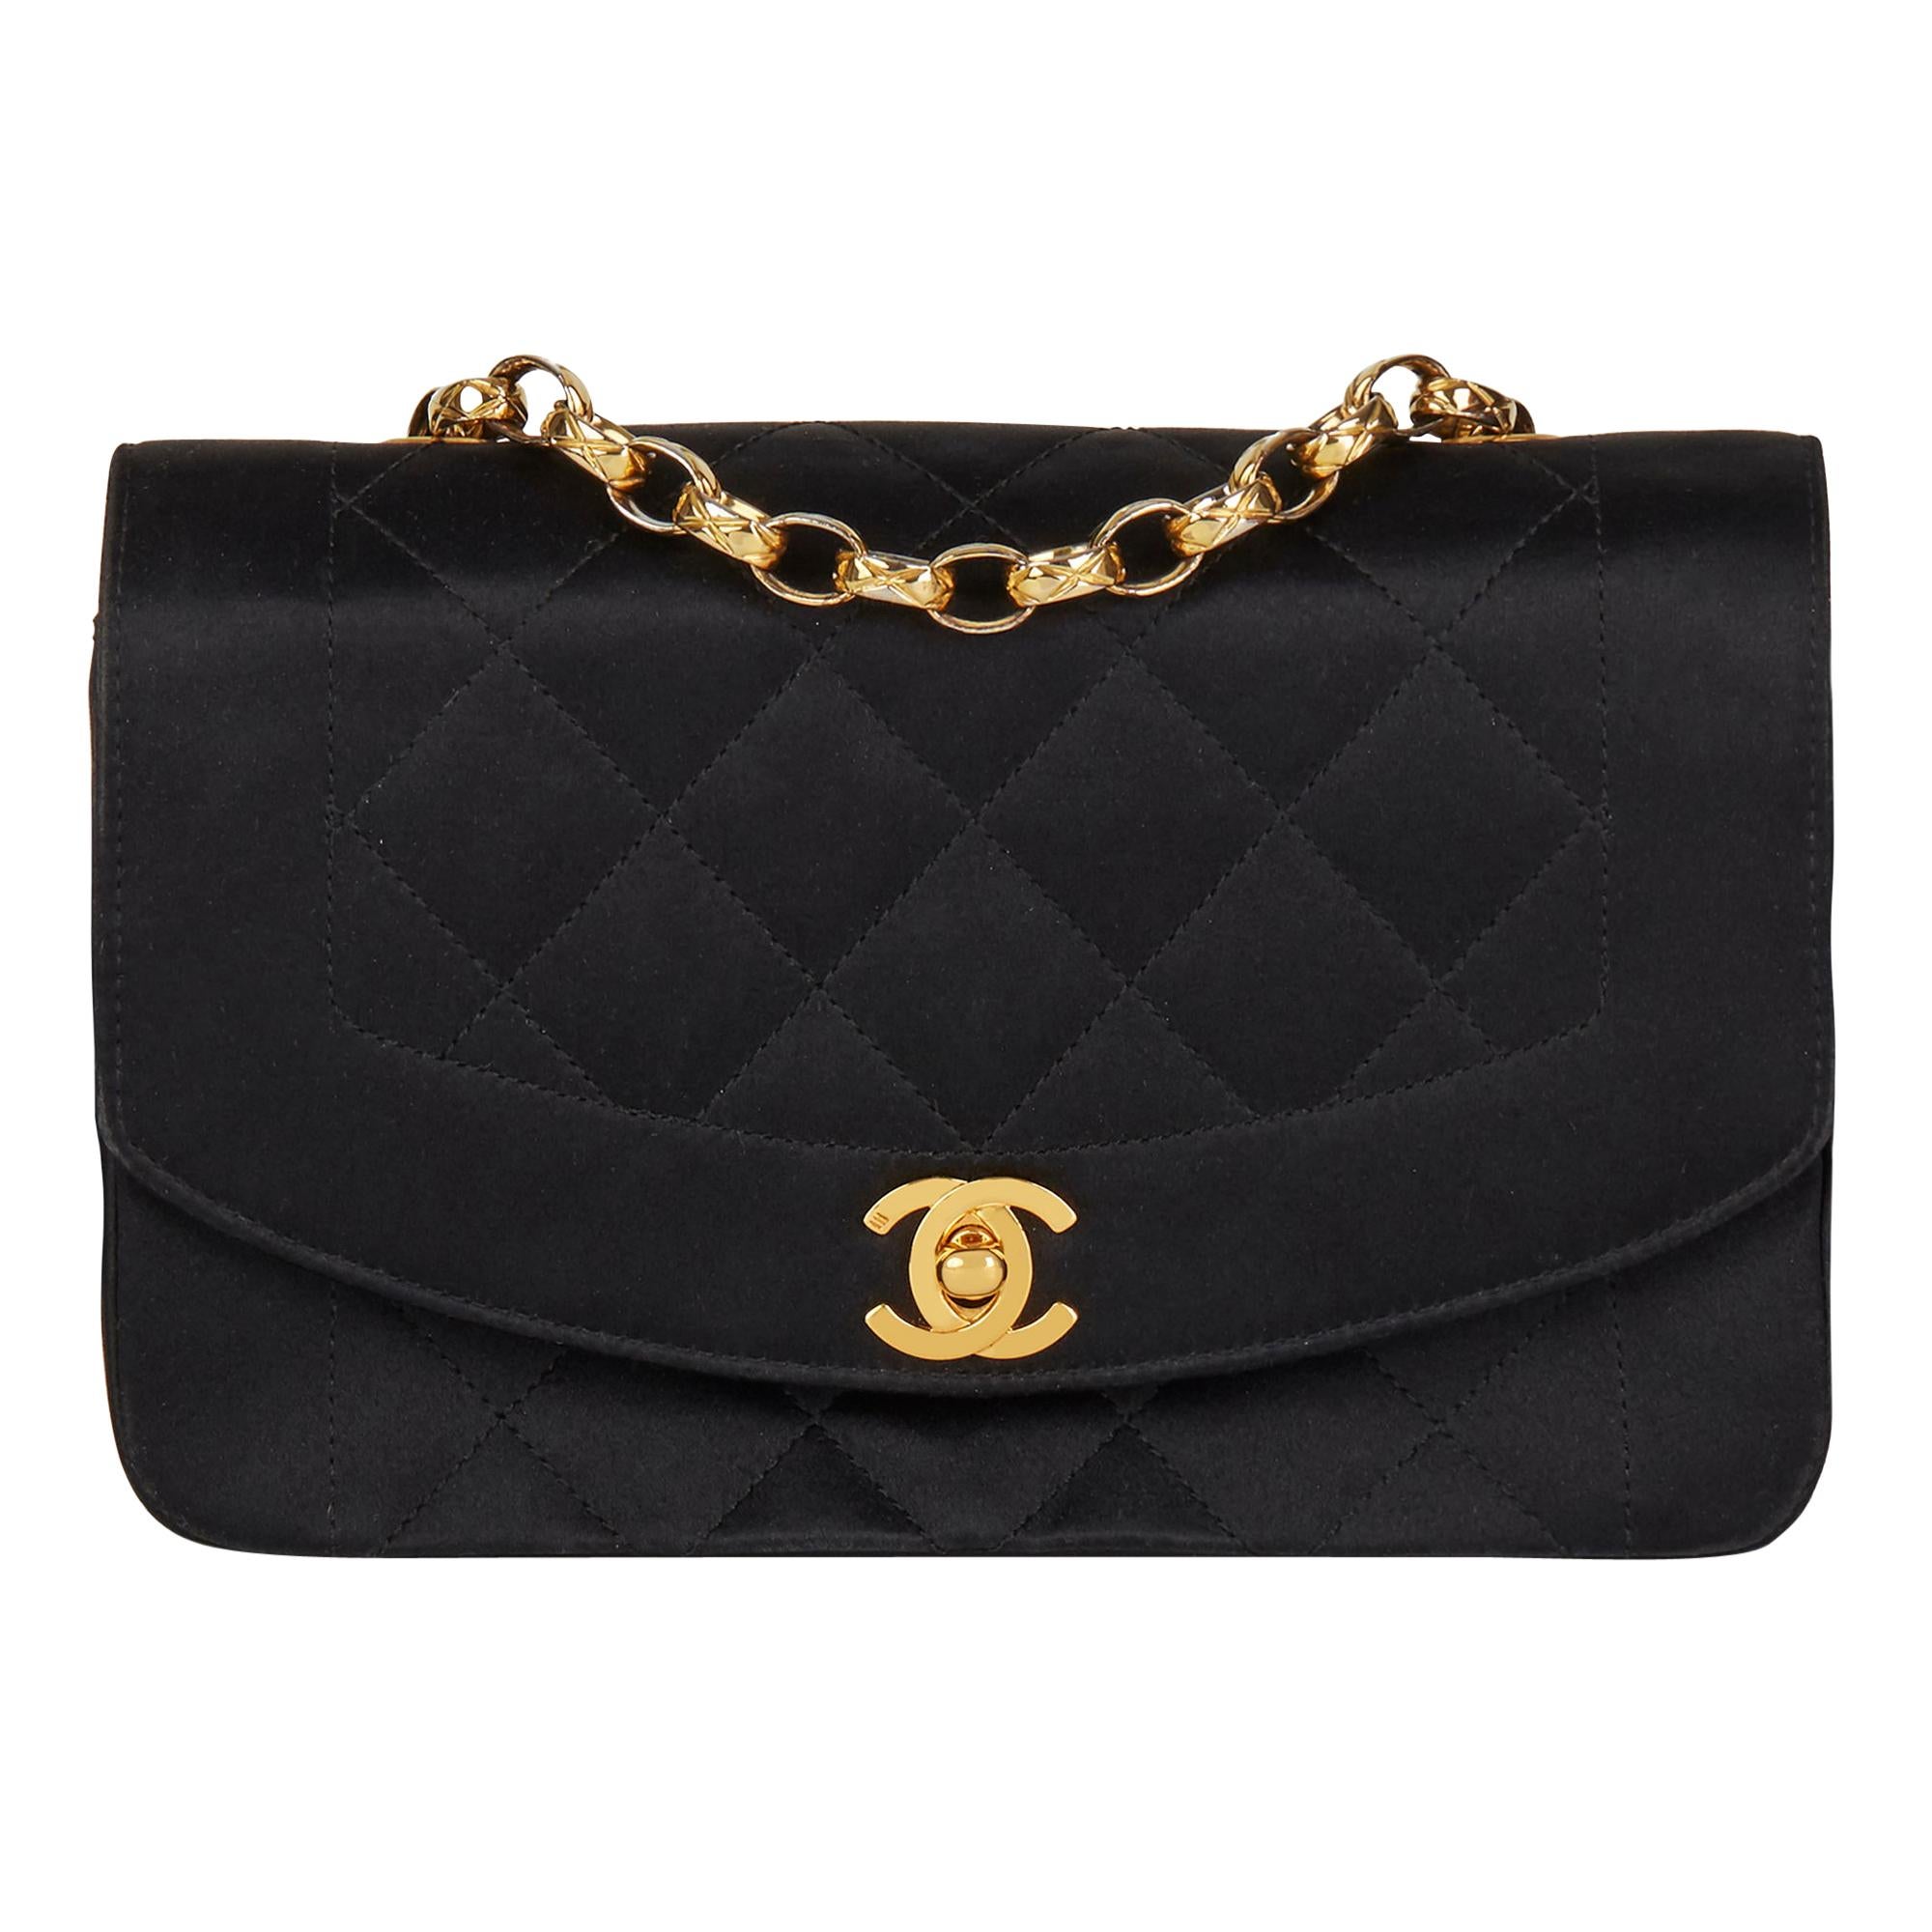 1991 Chanel Black Quilted Satin Vintage Mini Diana Classic Single Flap Bag 